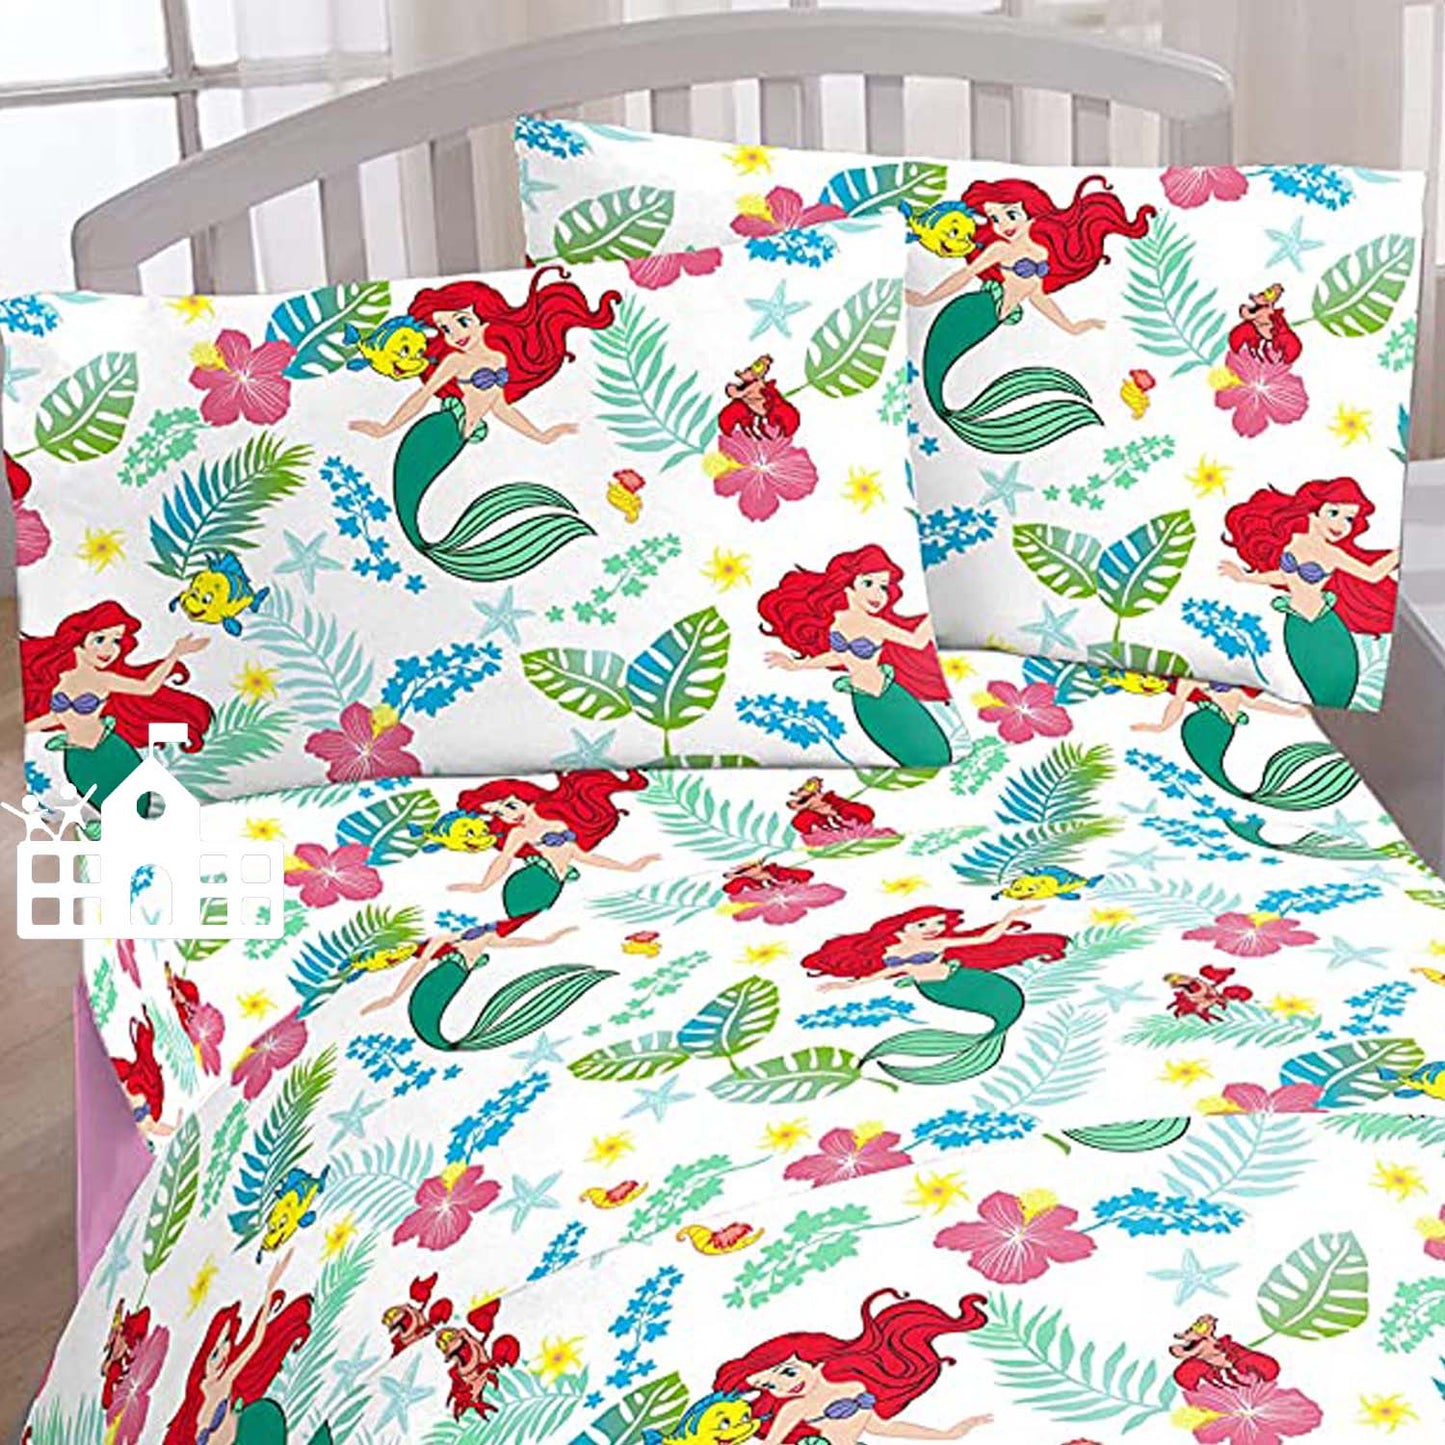 Ariel The Little Mermaid Twin Bed 3 Piece Sheet and Pillow Case Set